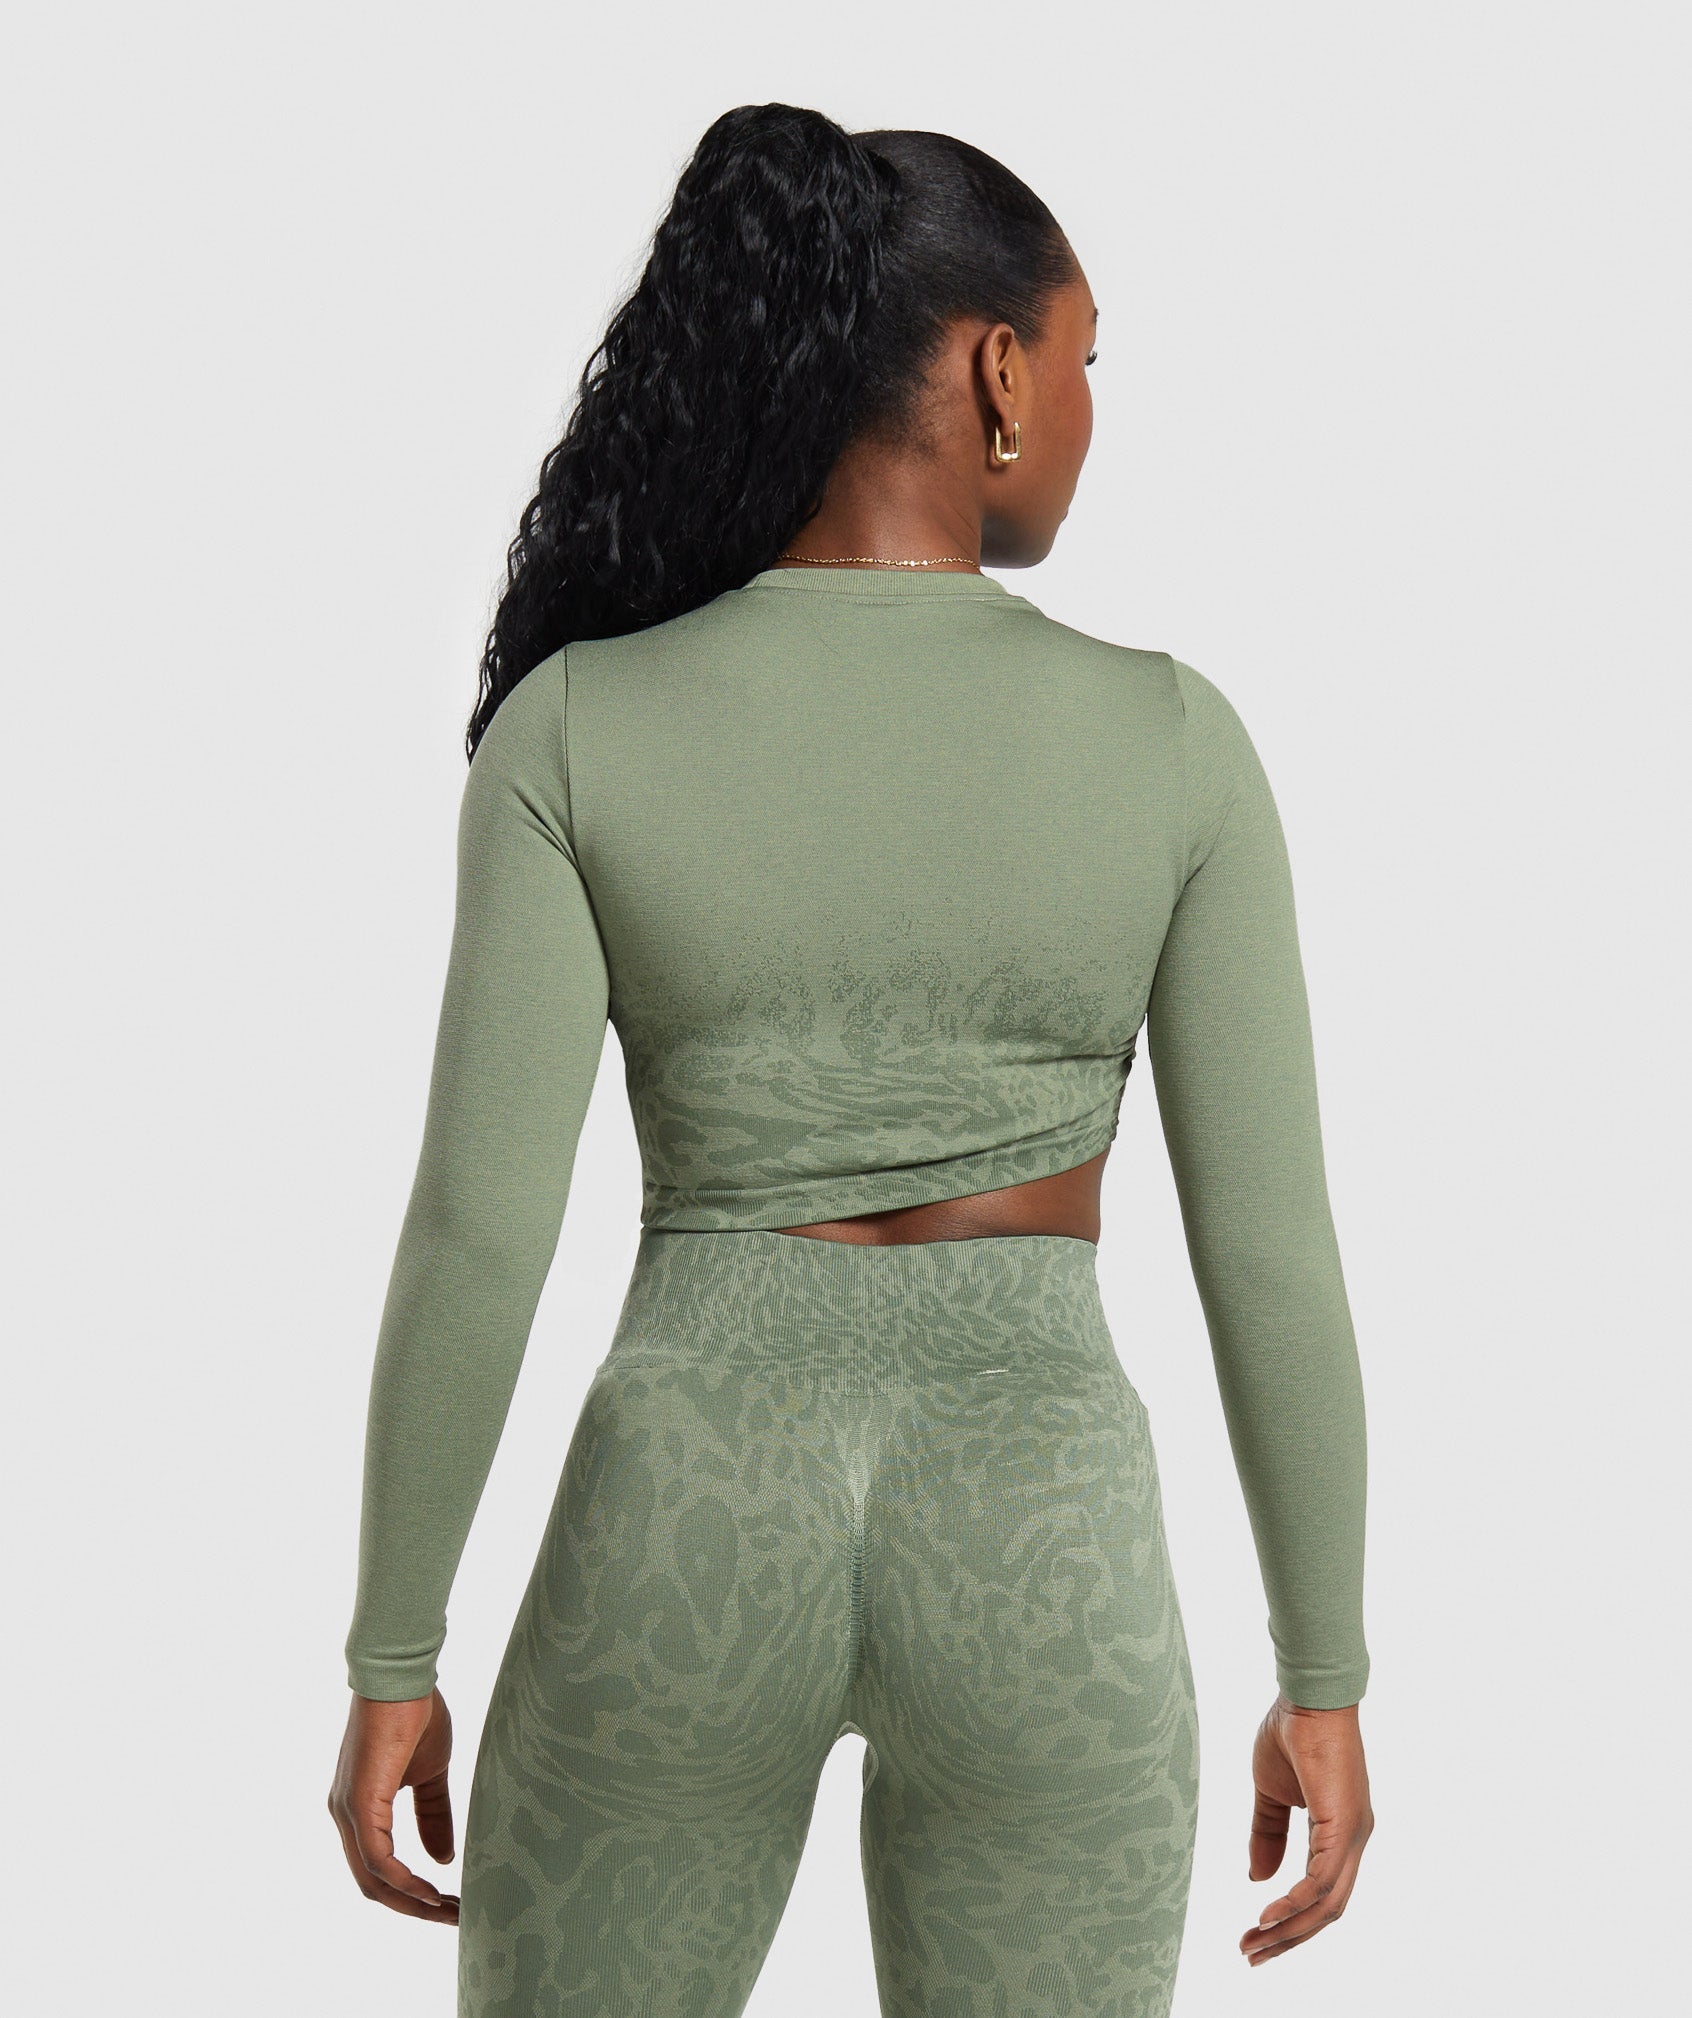 Adapt Safari Seamless Faded Long Sleeve Top in Force Green/Faded Green - view 2